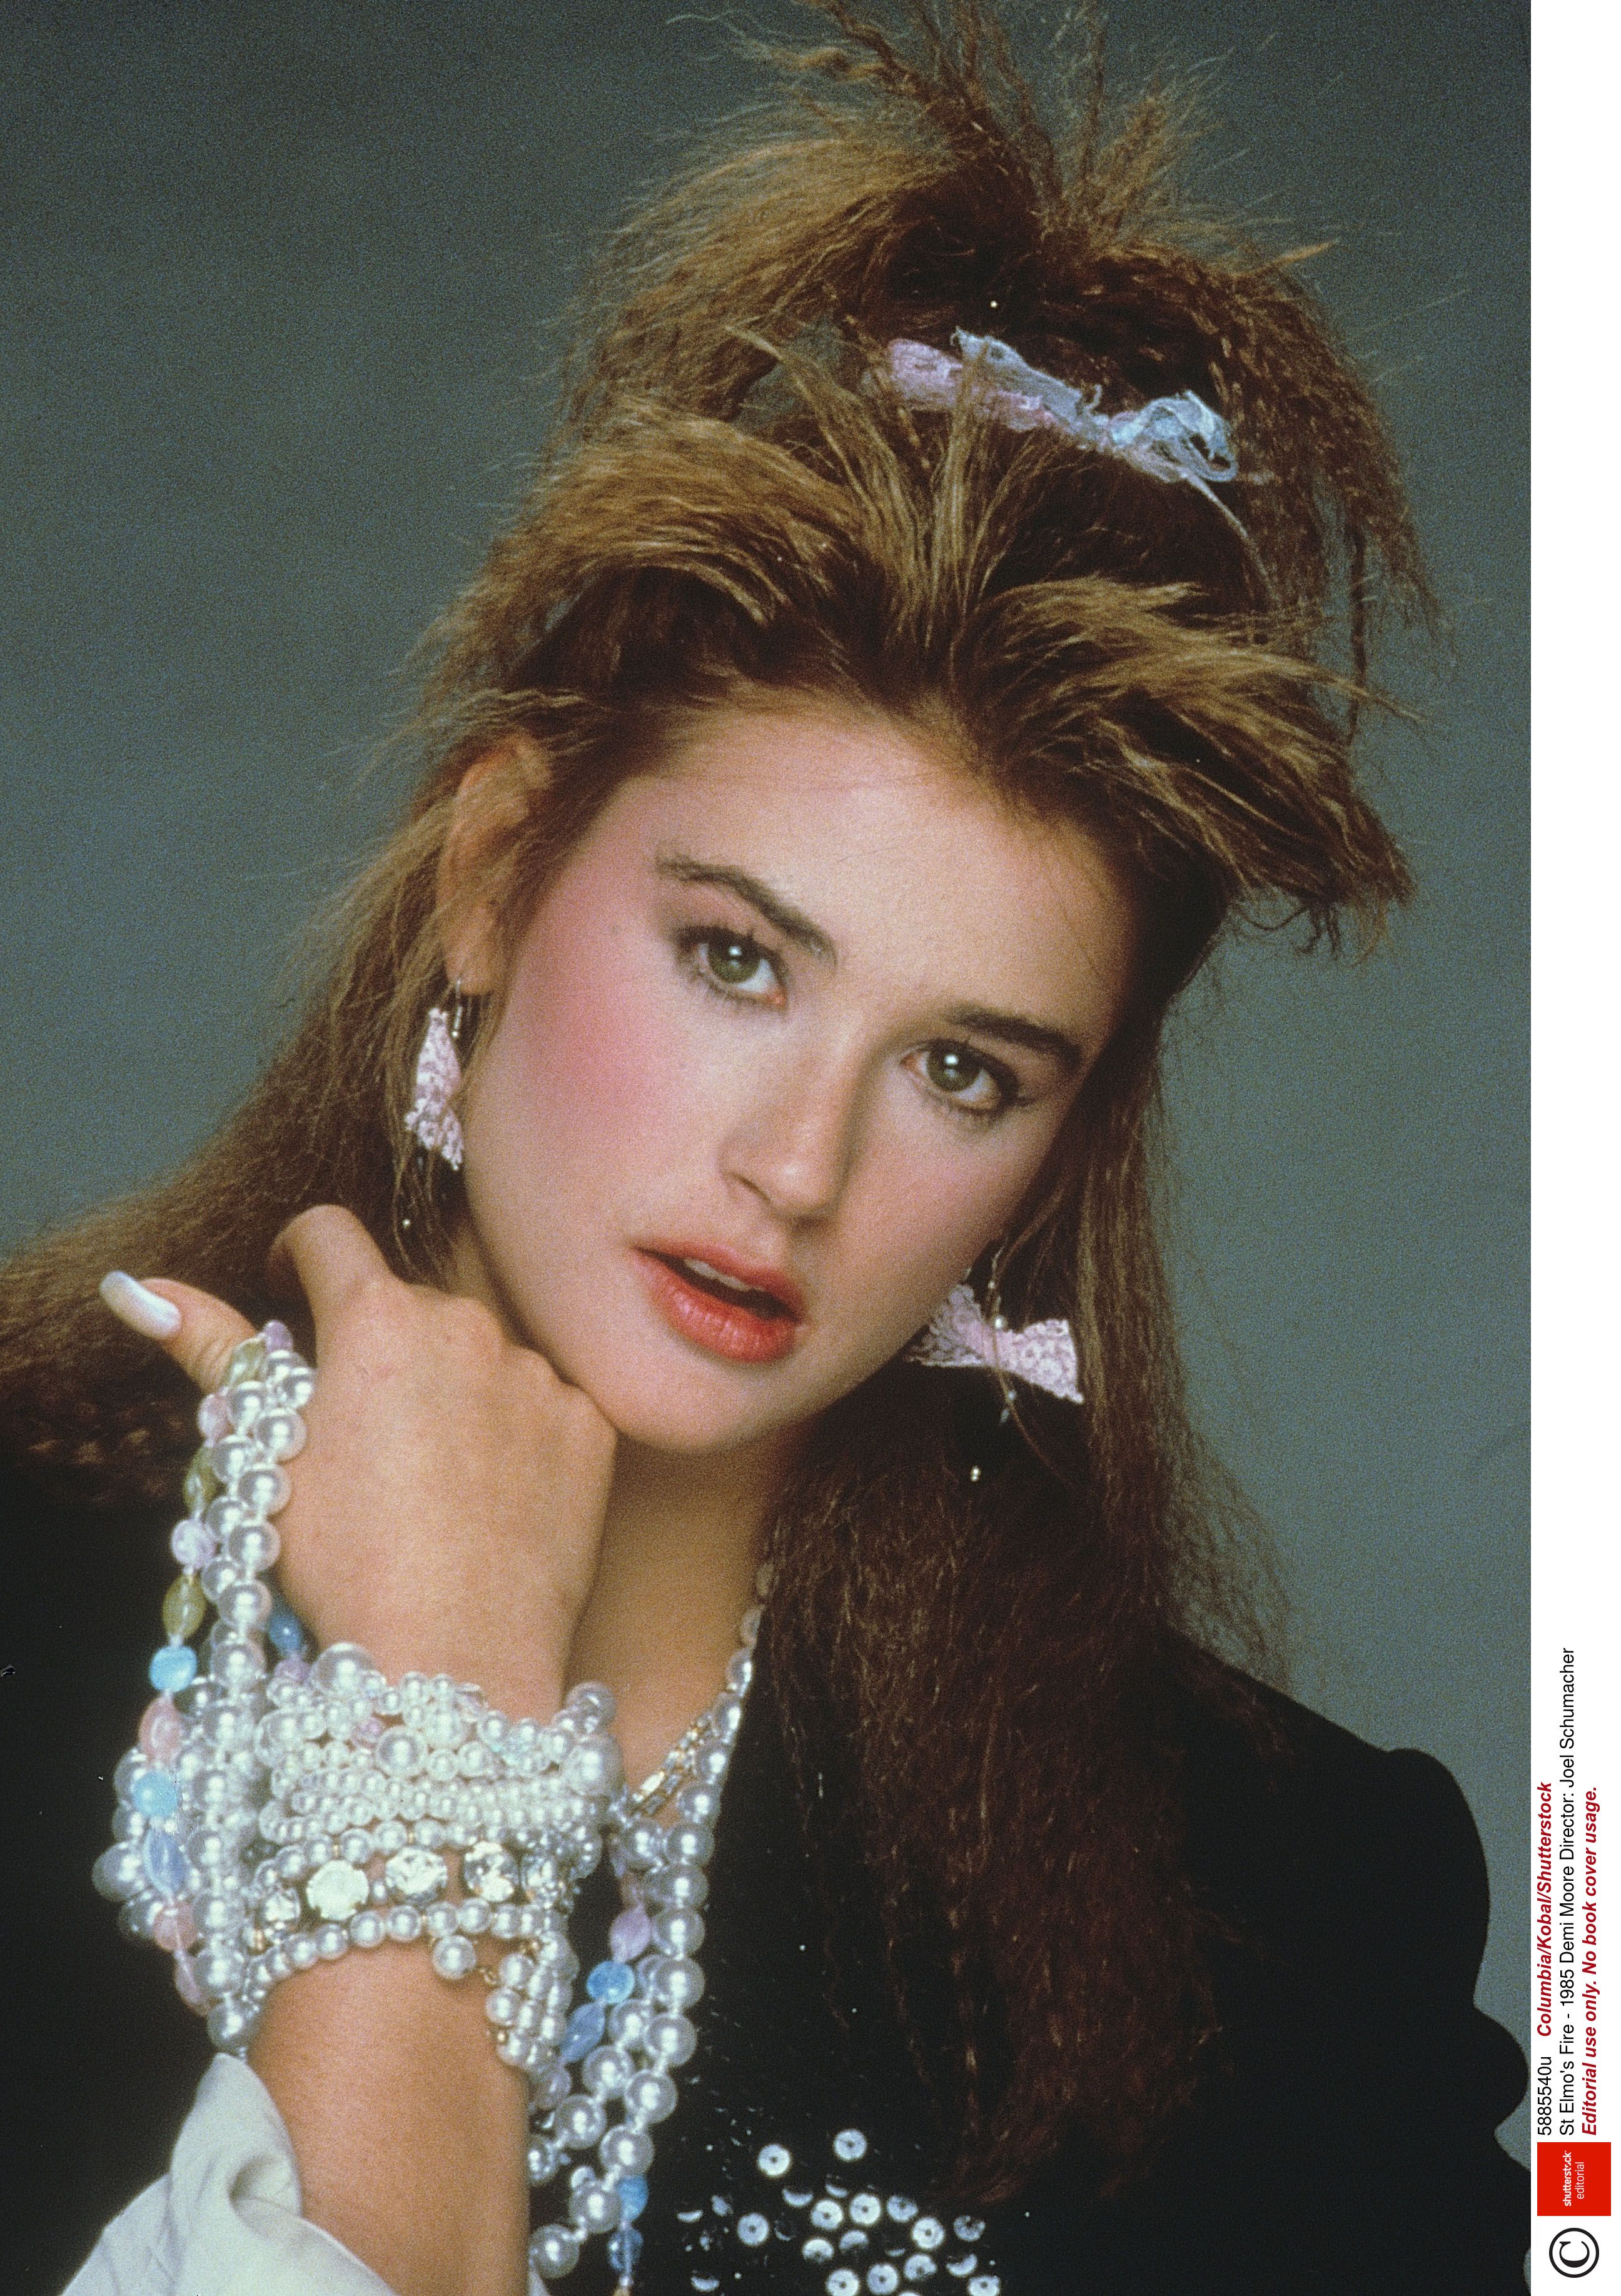 18 celebrity hairstyles from the '80s that you completely forgot about |  BusinessInsider India